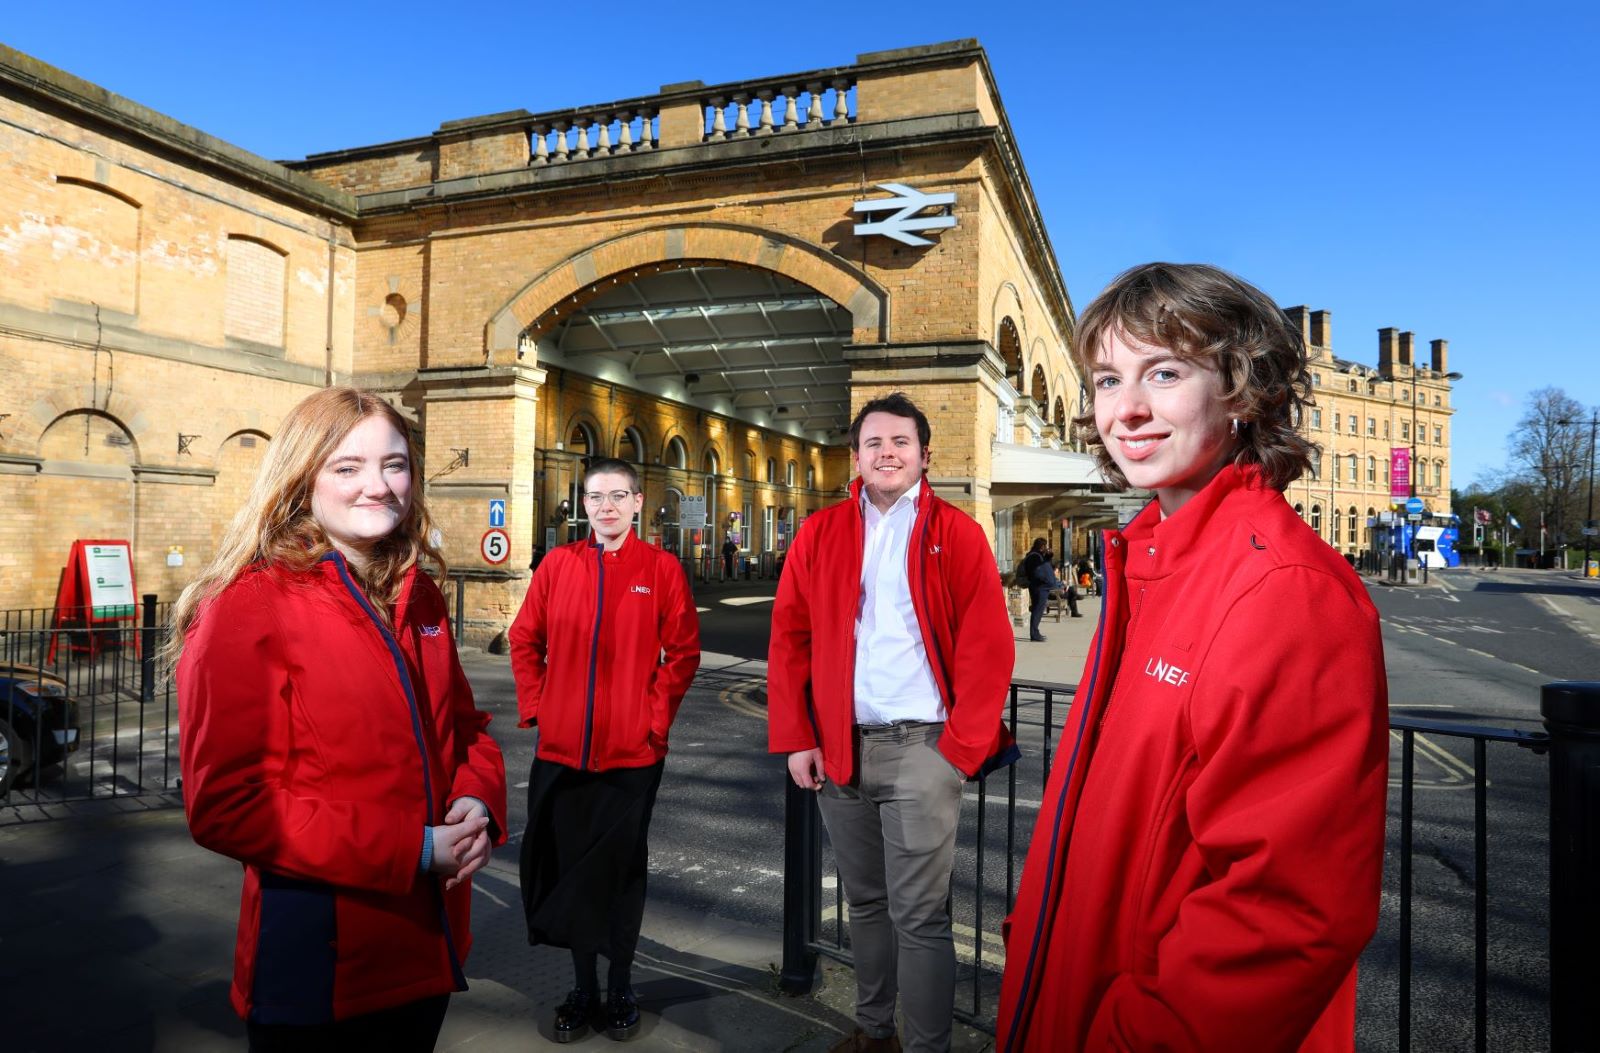 LNER Kickstarts Young People’s Careers With Experience Of Rail